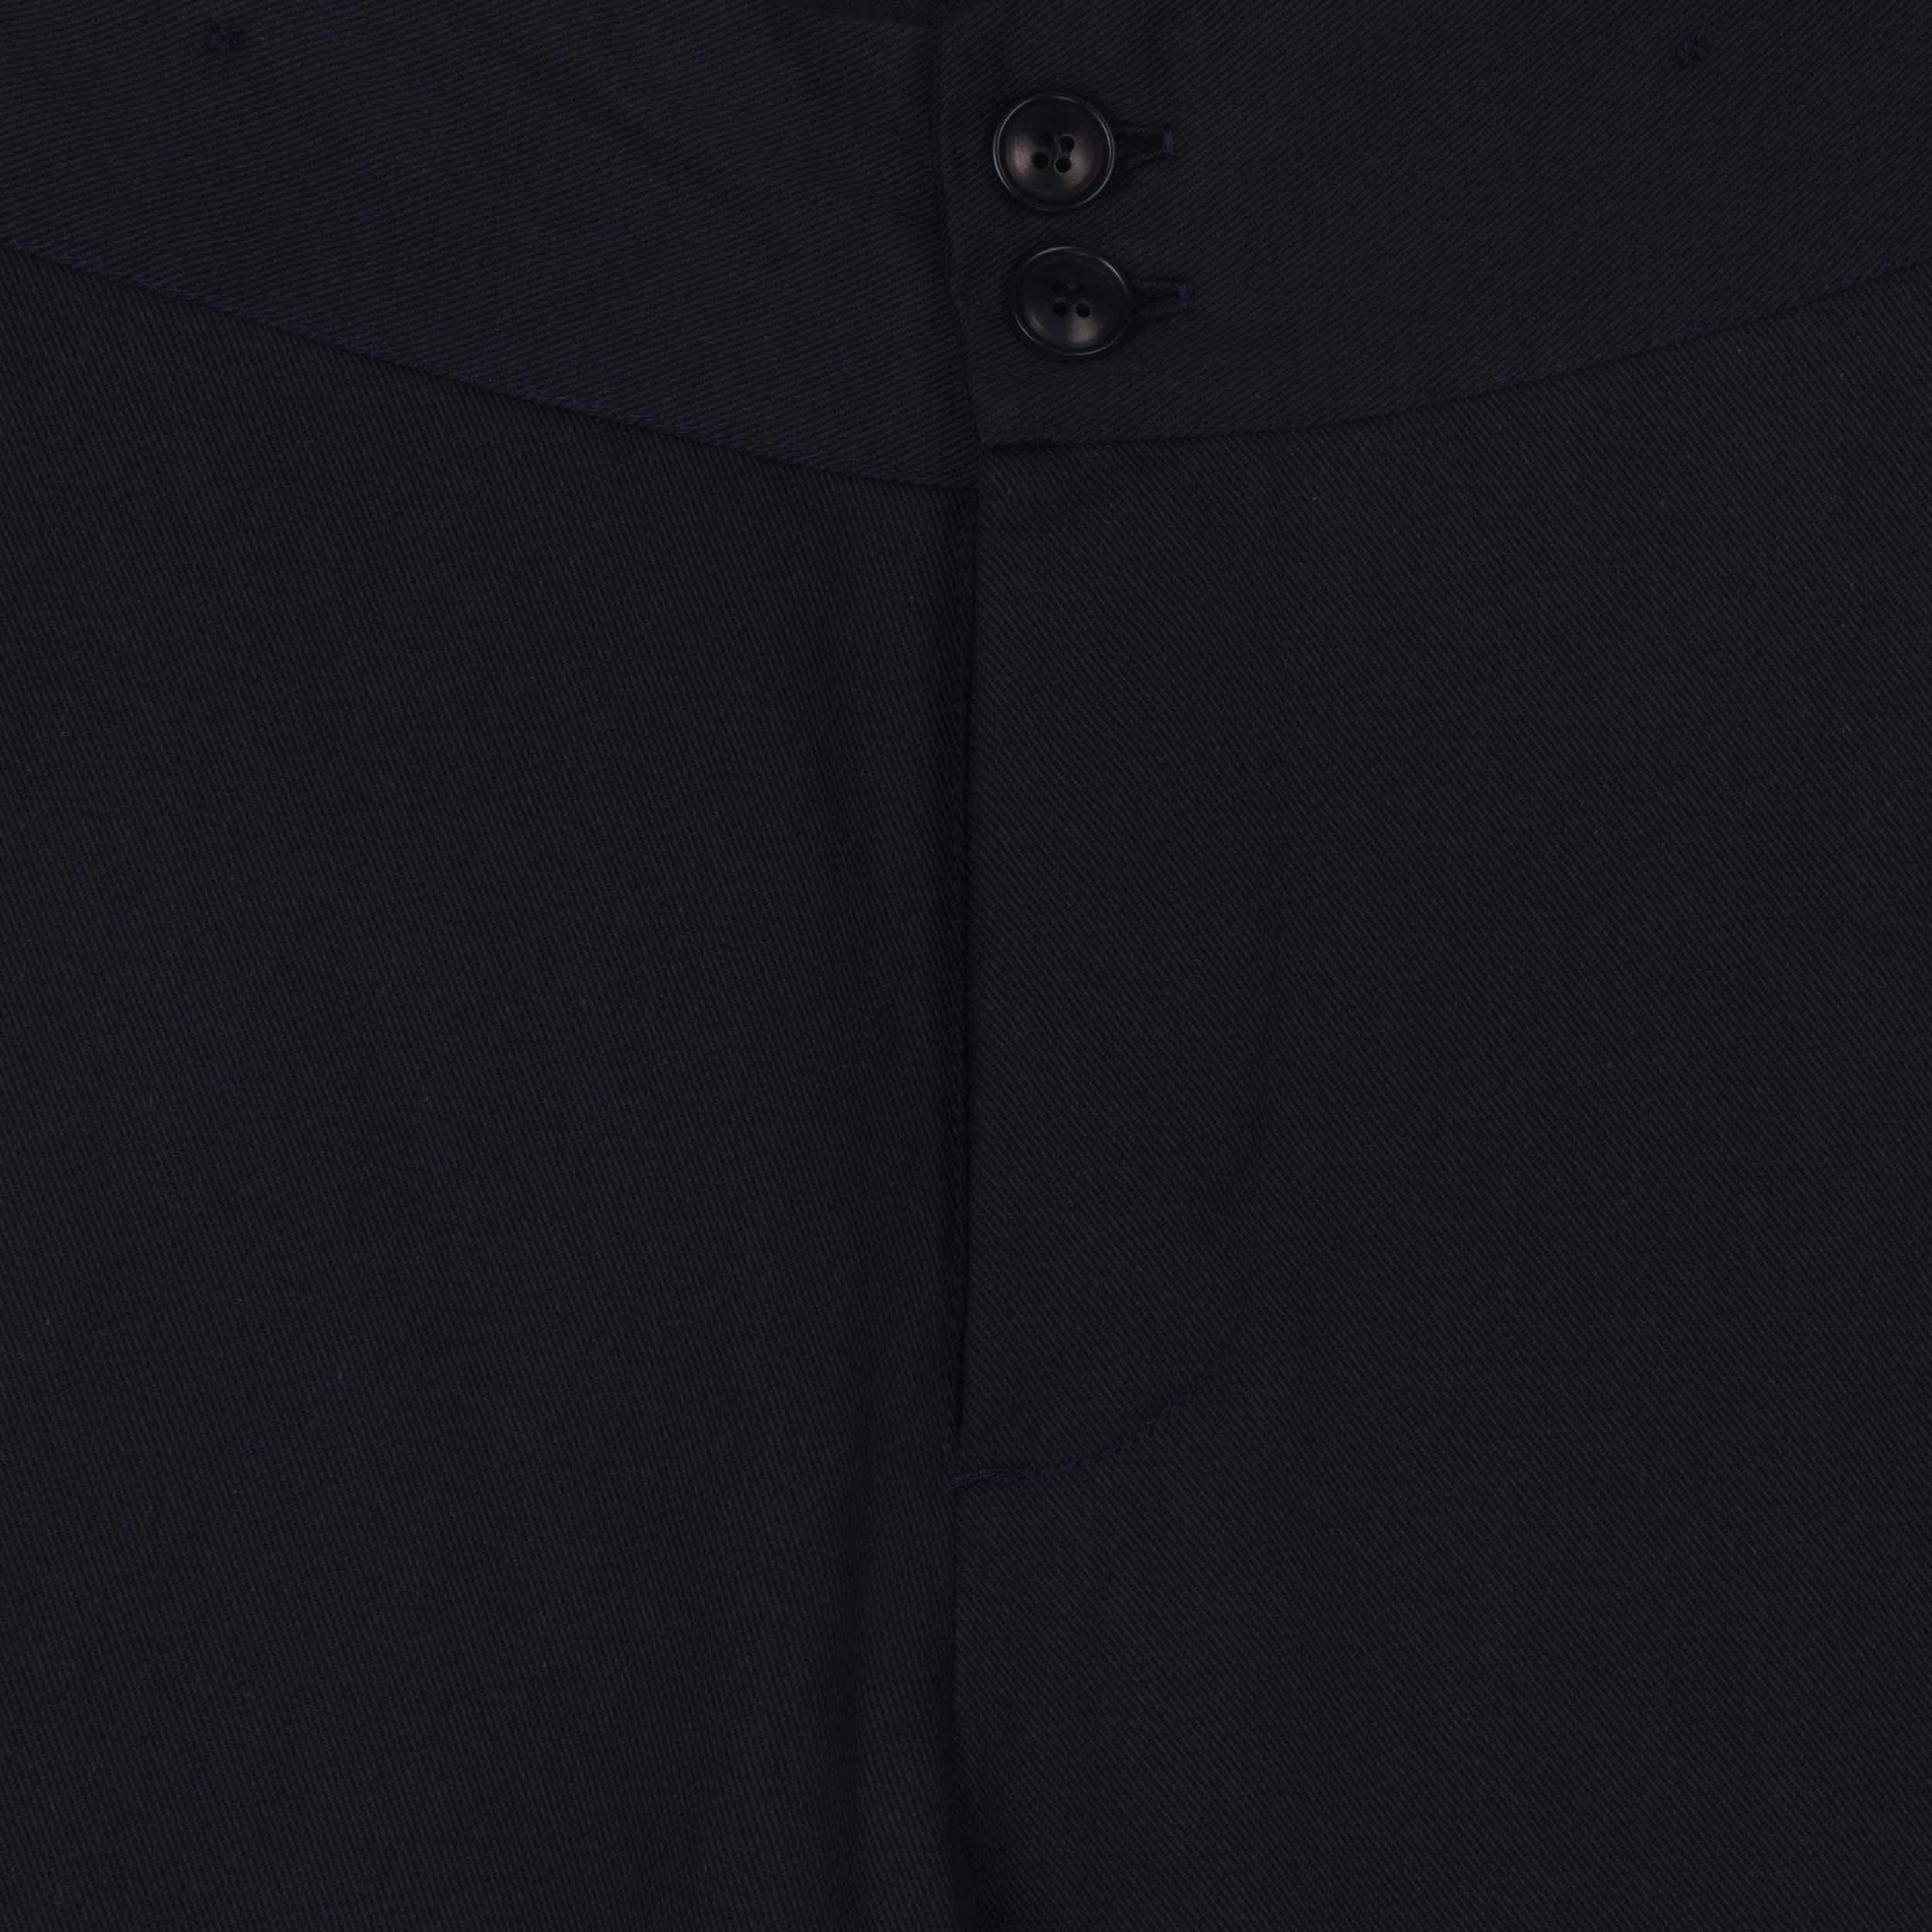 Carrier Company Colonial Trouser in Navy Cotton Drill